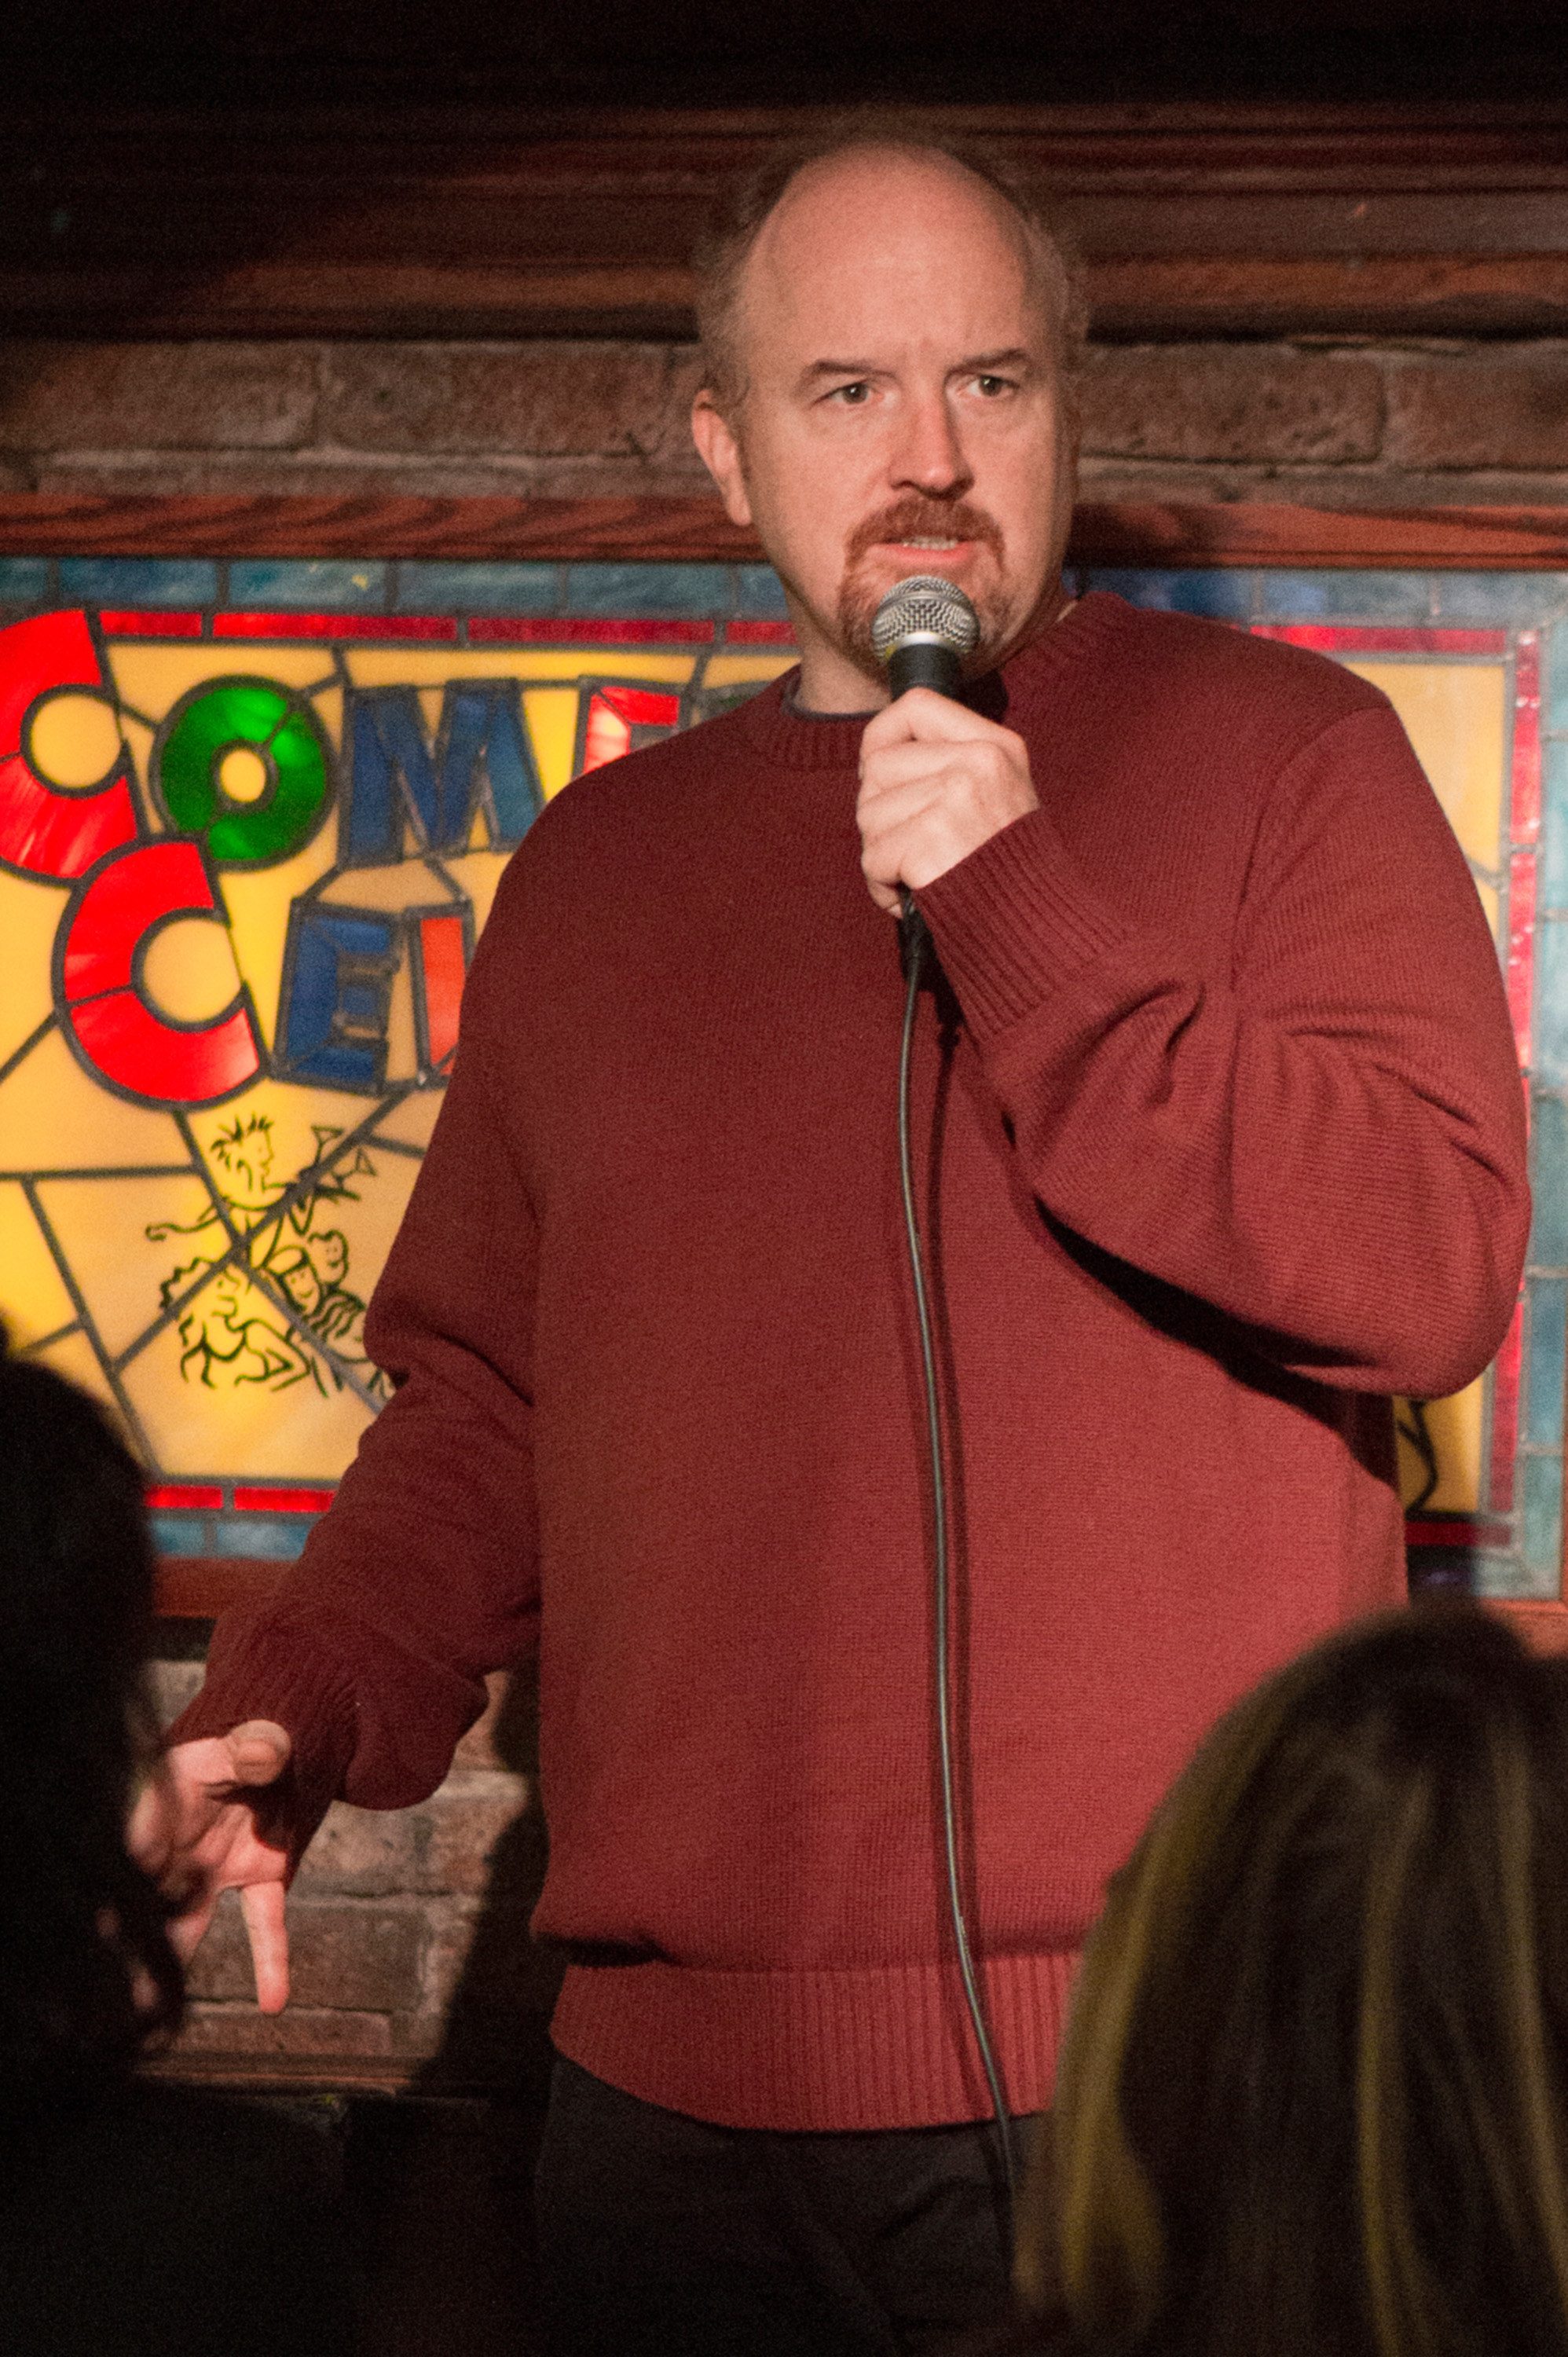 Louie in the show talking into a mic at a bar